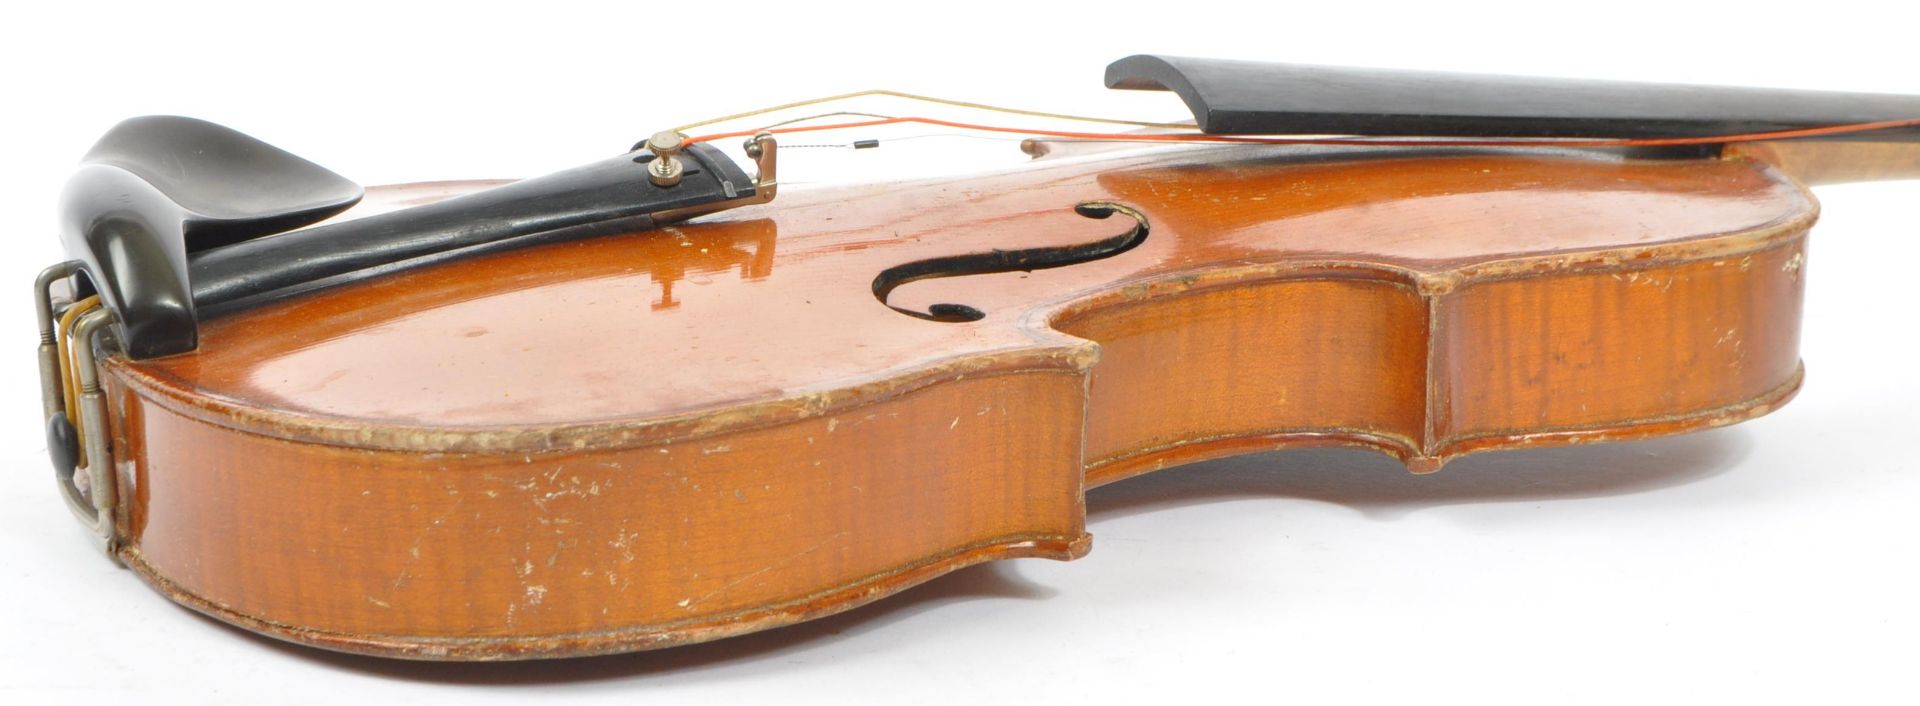 EARLY 20TH CENTURY GERMAN VIOLIN LABELLED D.R.G.M 728940 - Image 7 of 10